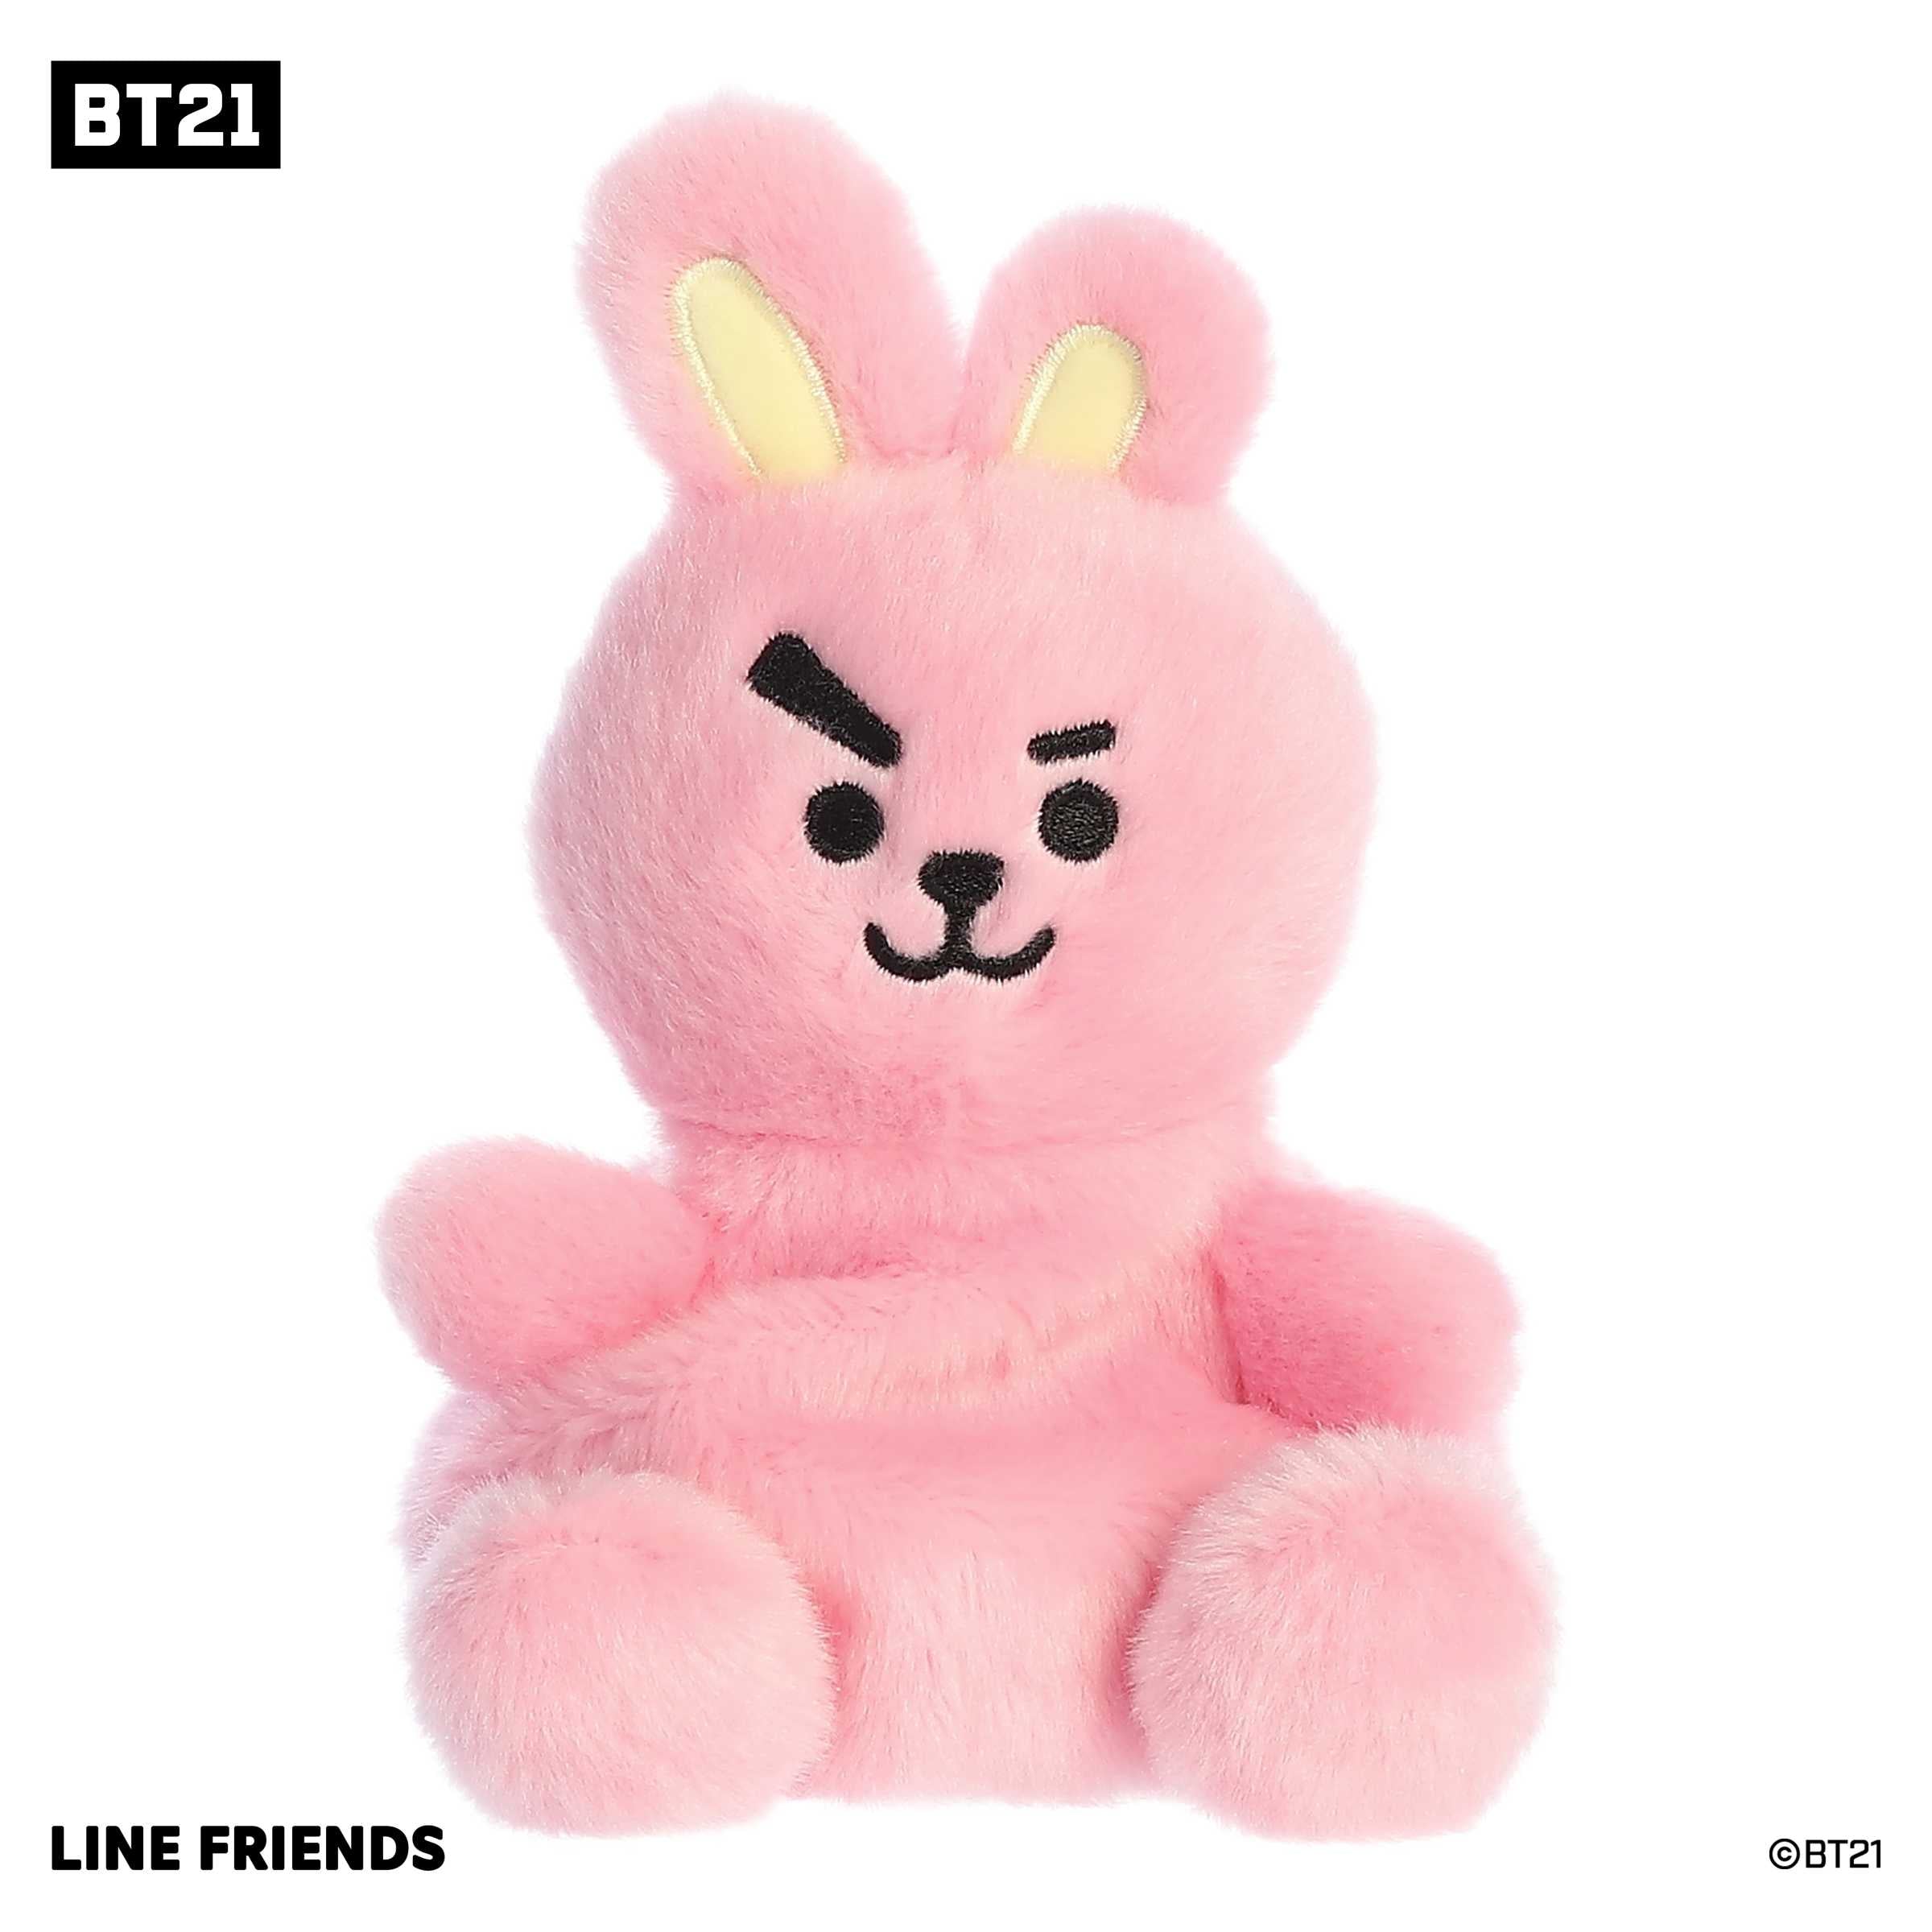 Adorable mini BT21 plush toy with a fluffy pink fur body, yellow accents on ears, and black accents on a smiling face